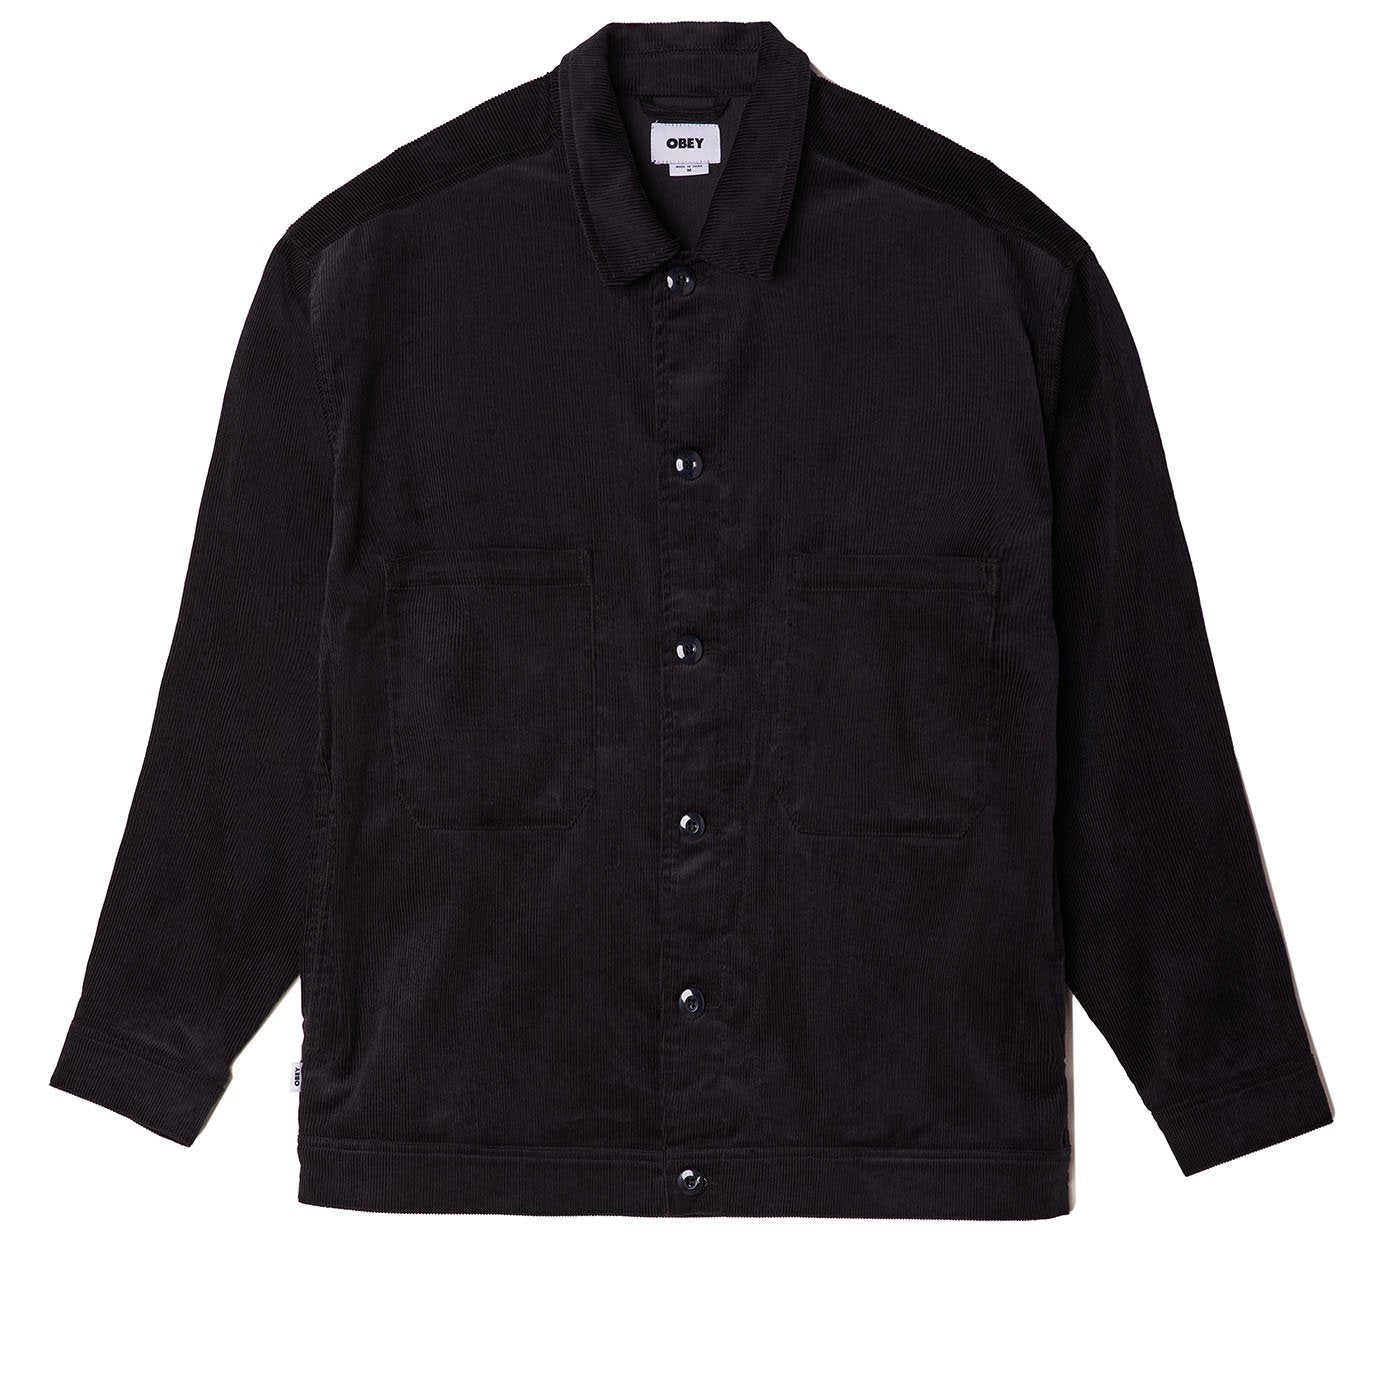 OBEY Marquee Shirt Jacket